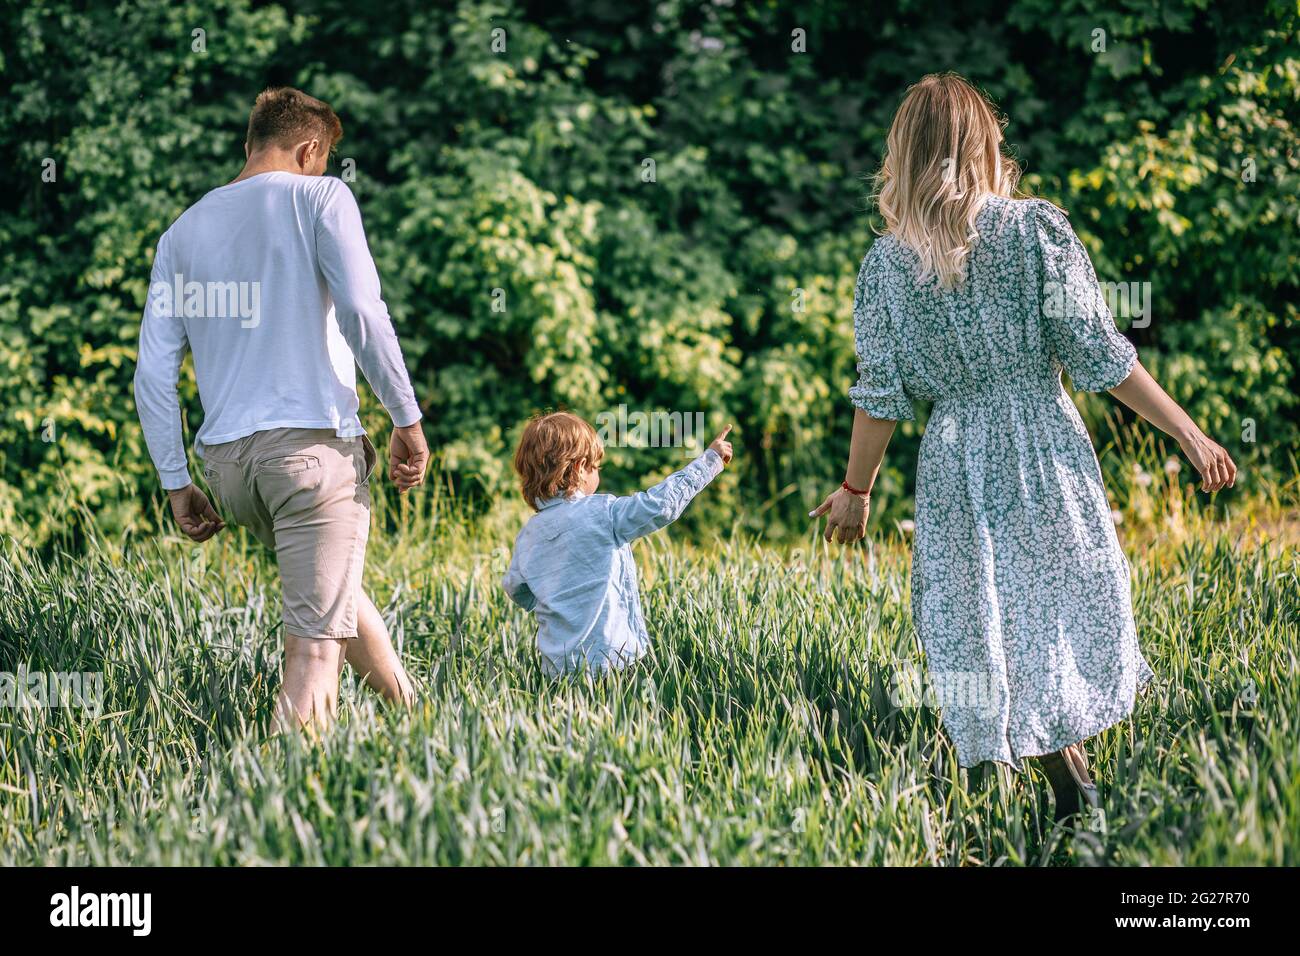 Family Holding Hands with Child, Rear View, Mother, Father walking Outdoors, Two Parents are in Agricultural Field, photo Stock Photo